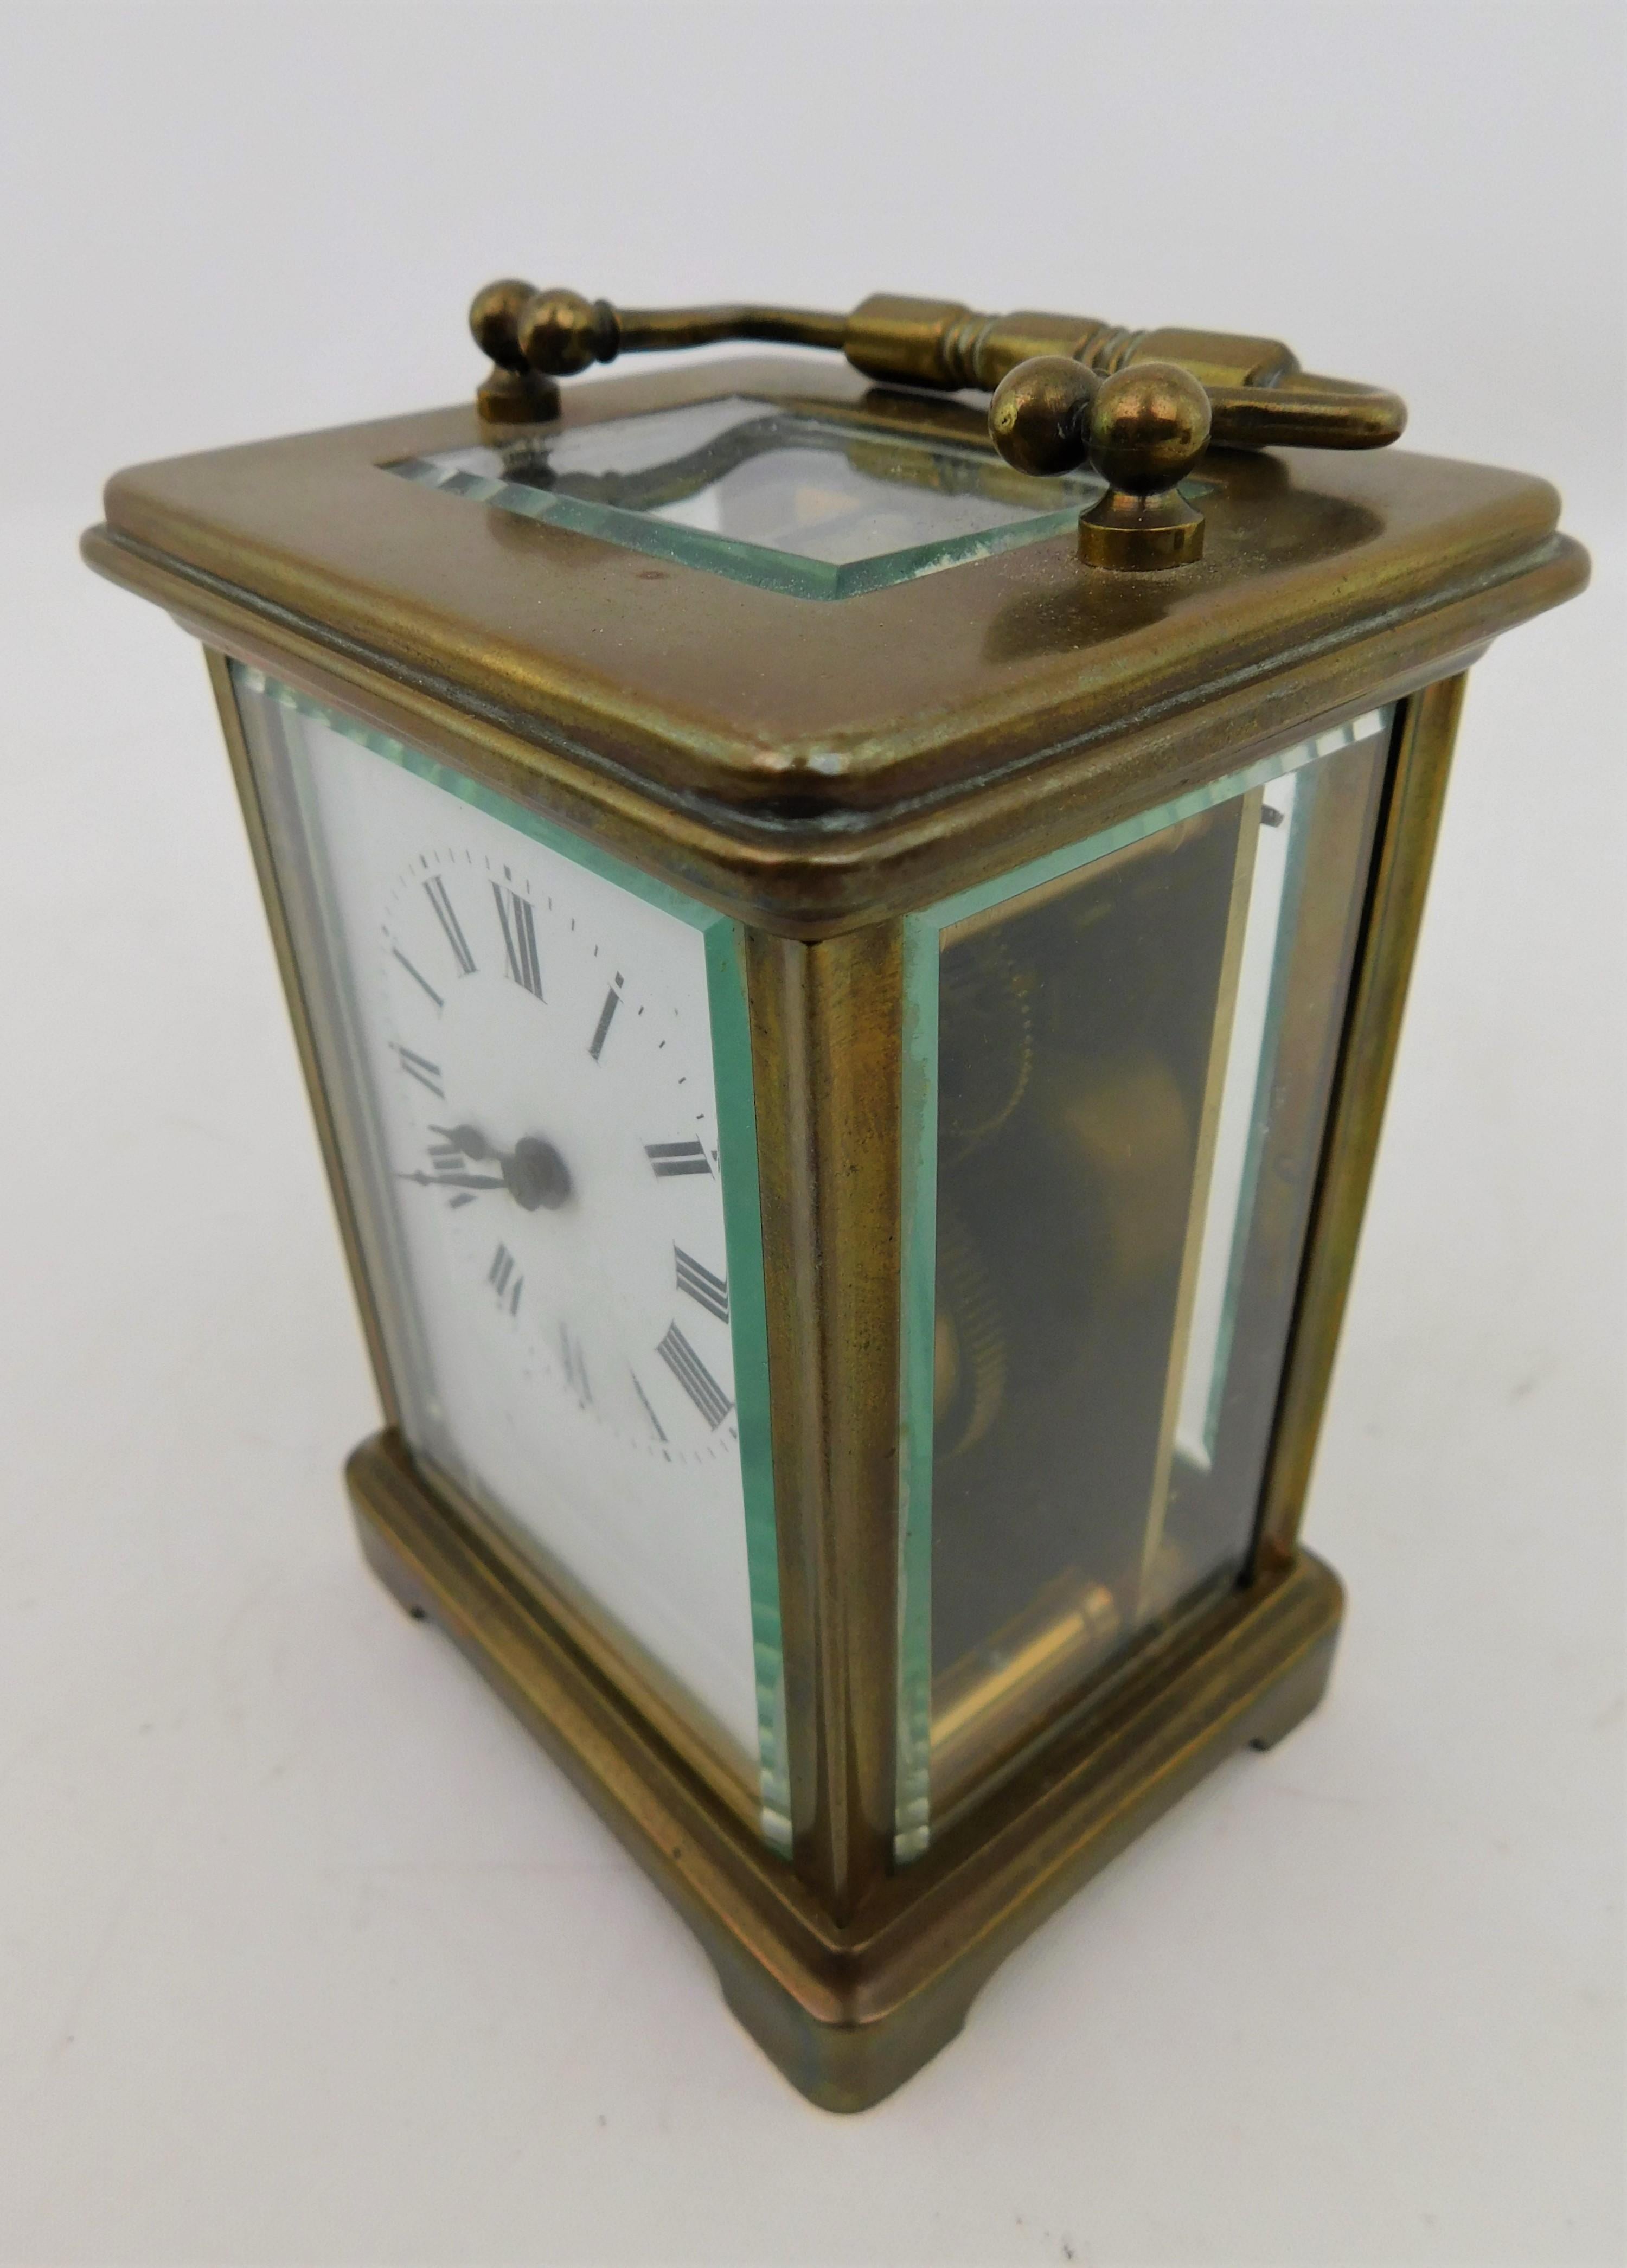 19th Century Victorian English Carriage Travel Clock in Leather Case with Key In Good Condition For Sale In Hamilton, Ontario